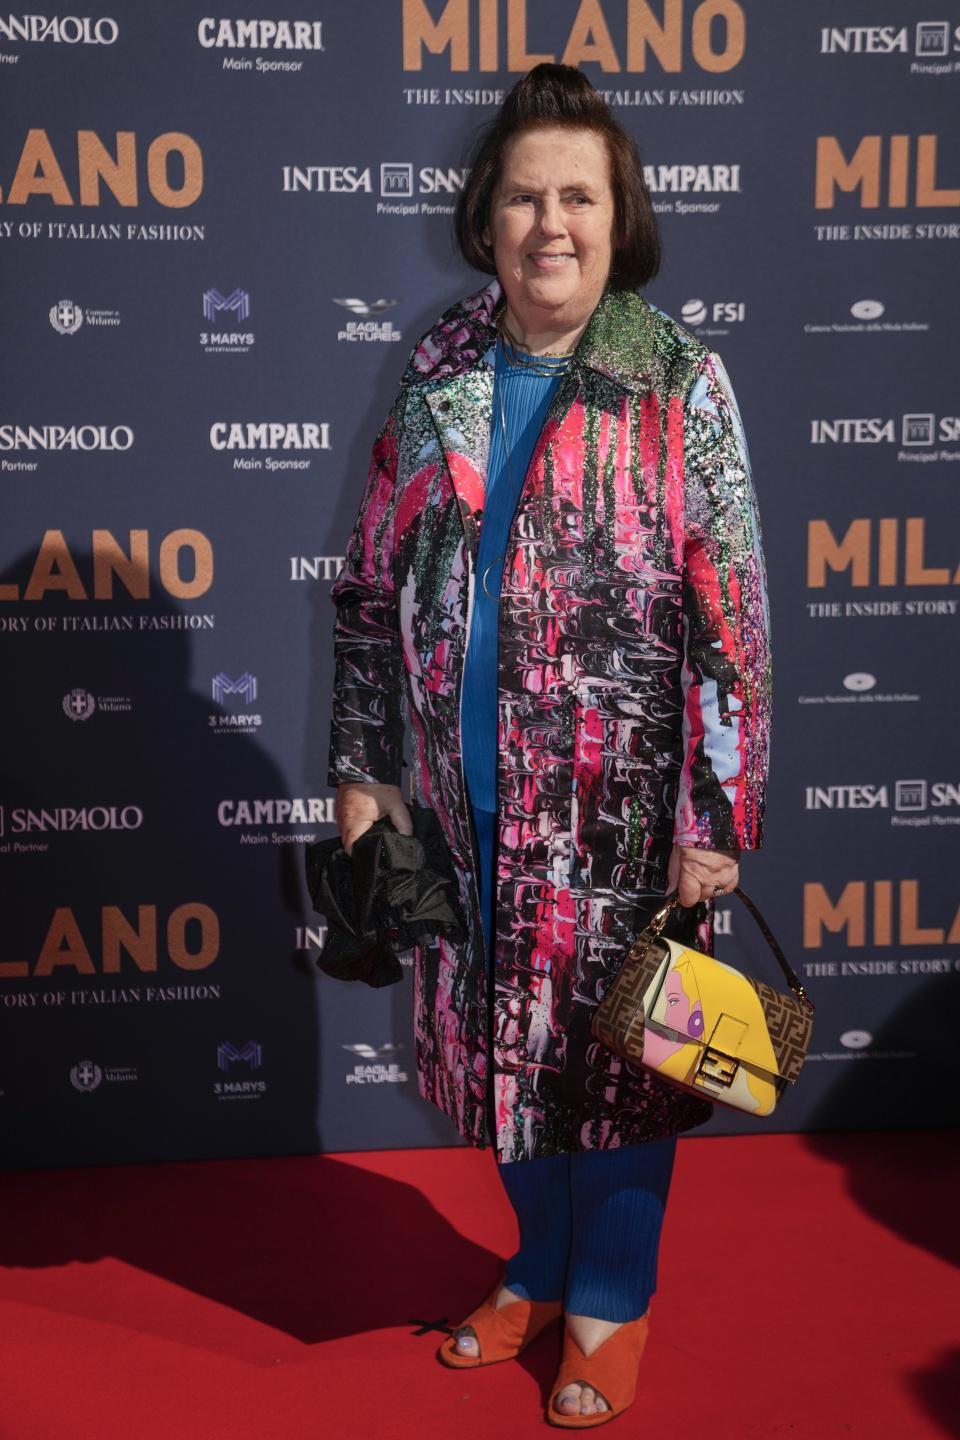 Suzy Menkes poses for photographers upon arrival for the premiere of the film 'Milano, the inside story of Milan Fashion' in Milan, Italy, Sunday, Feb. 26, 2023. (AP Photo/Luca Bruno)